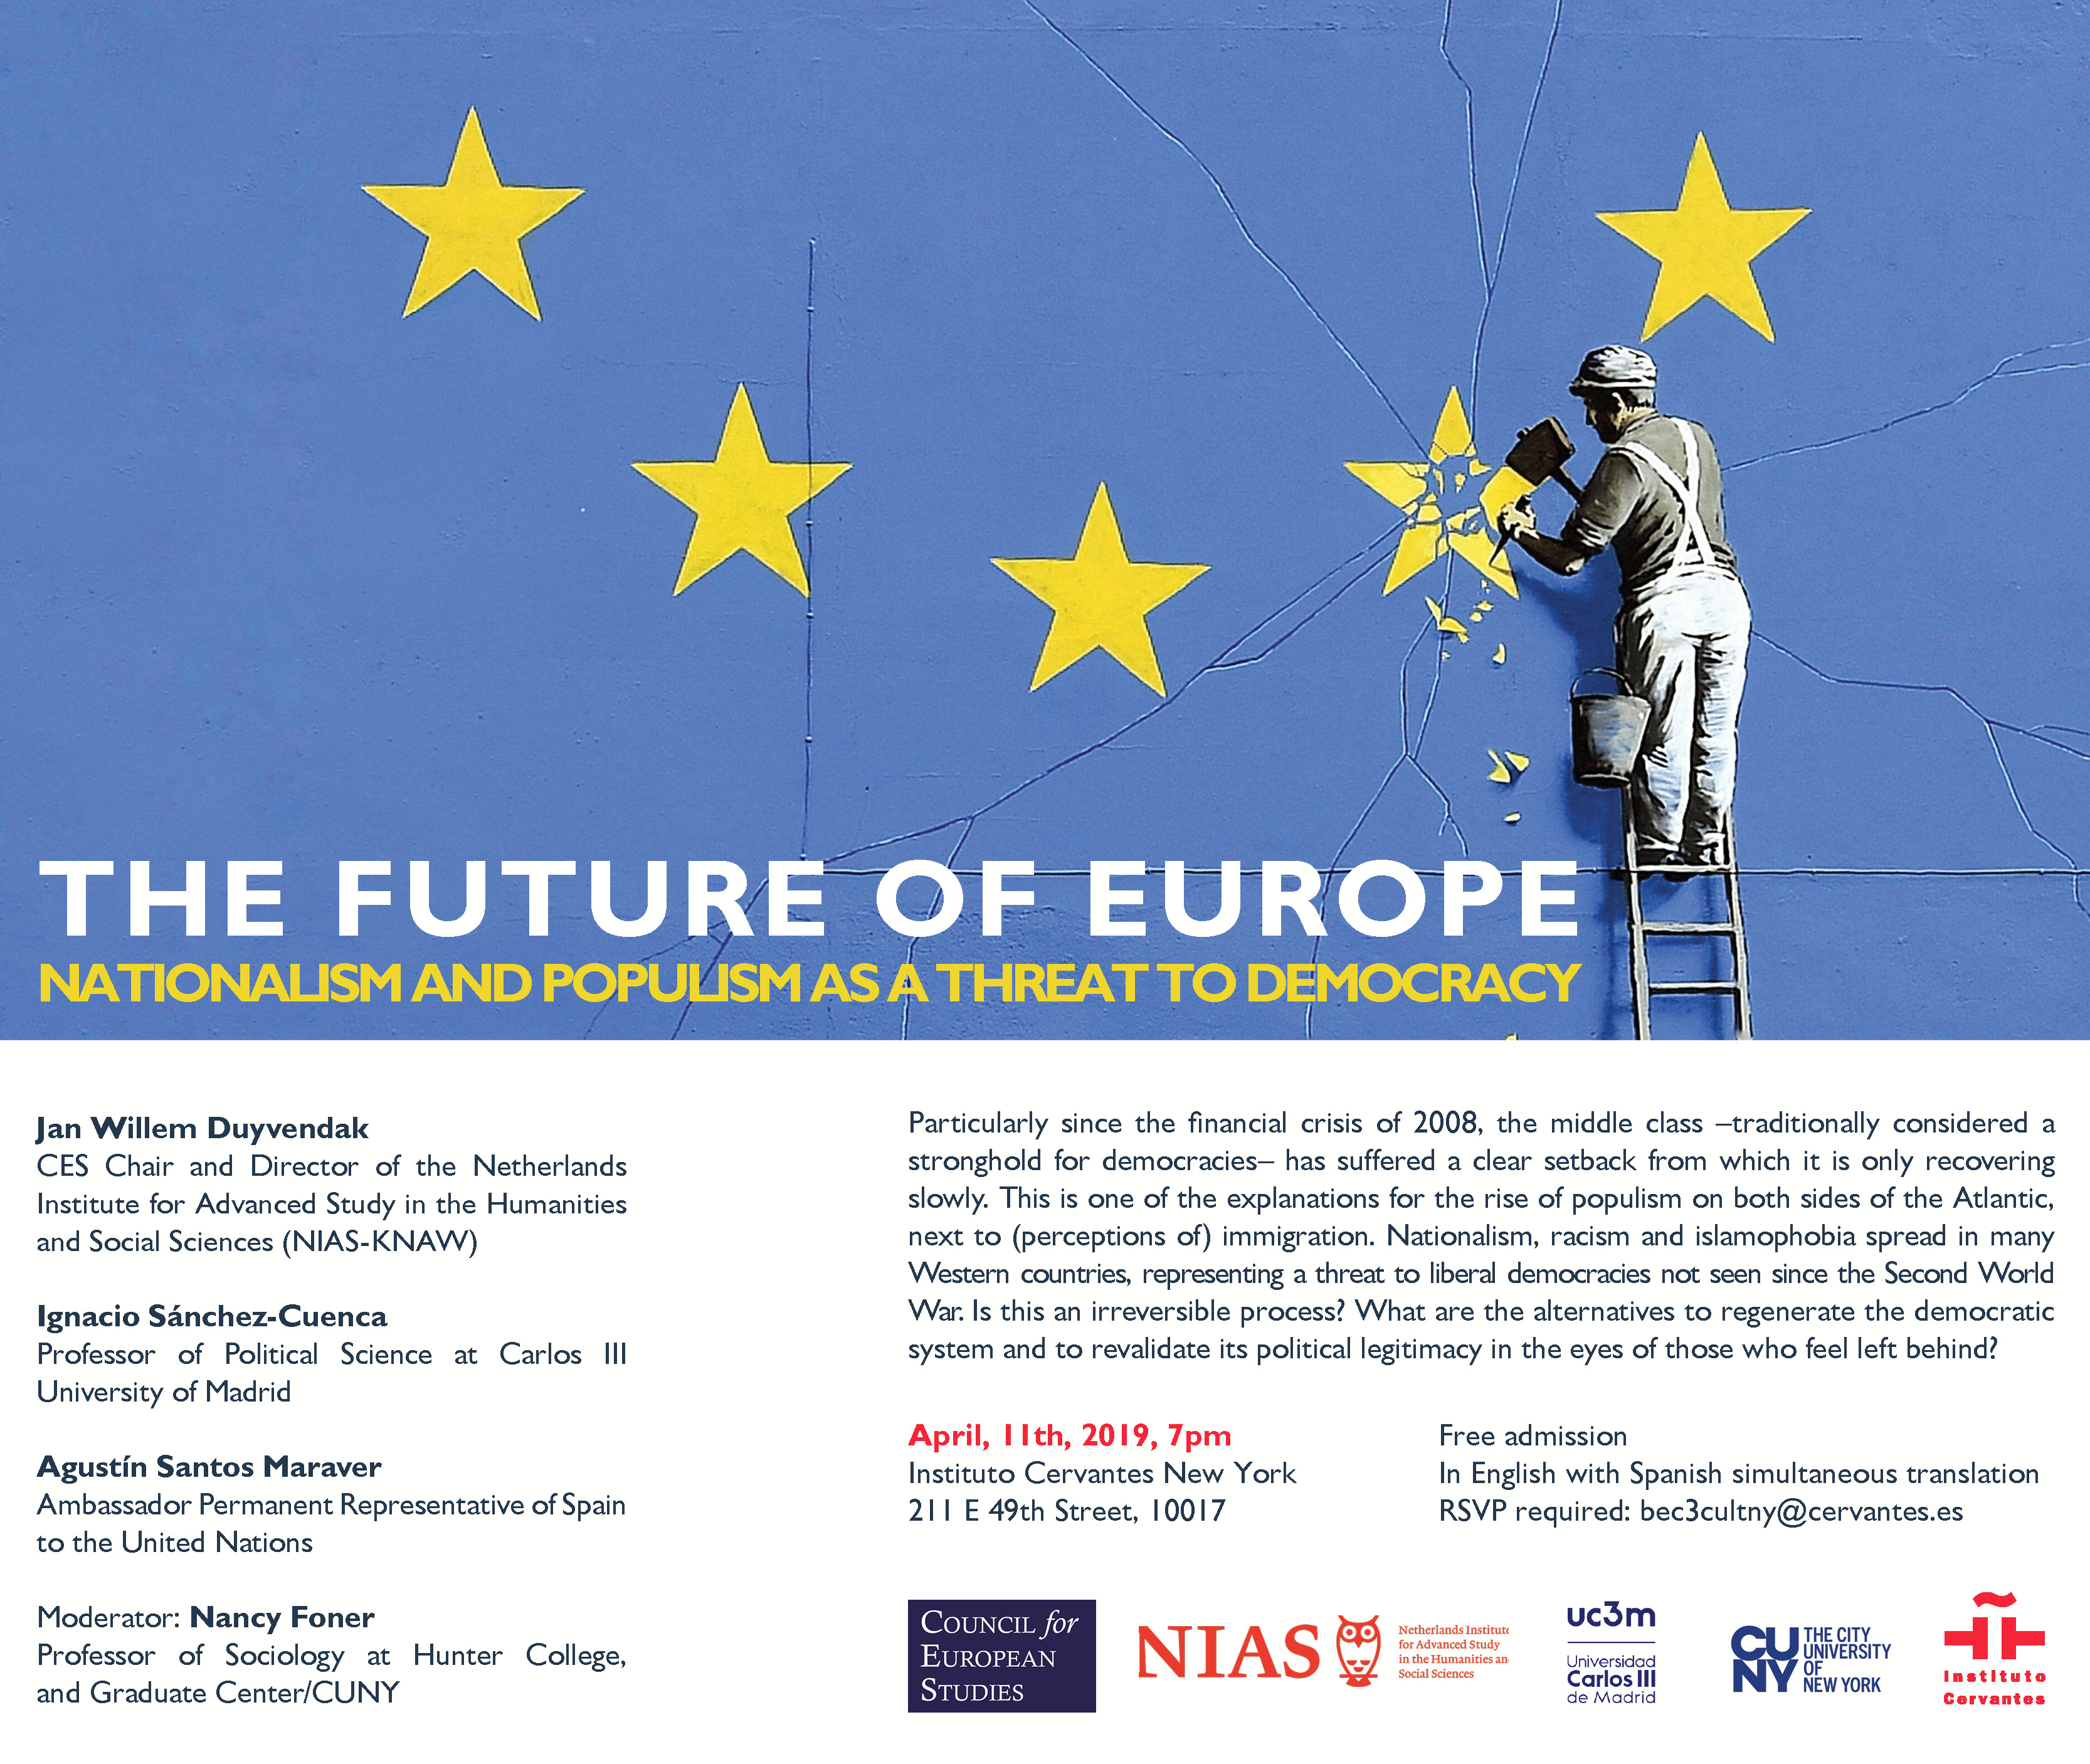 The Future of Europe: Nationalism and Populism as a Threat to Democracy